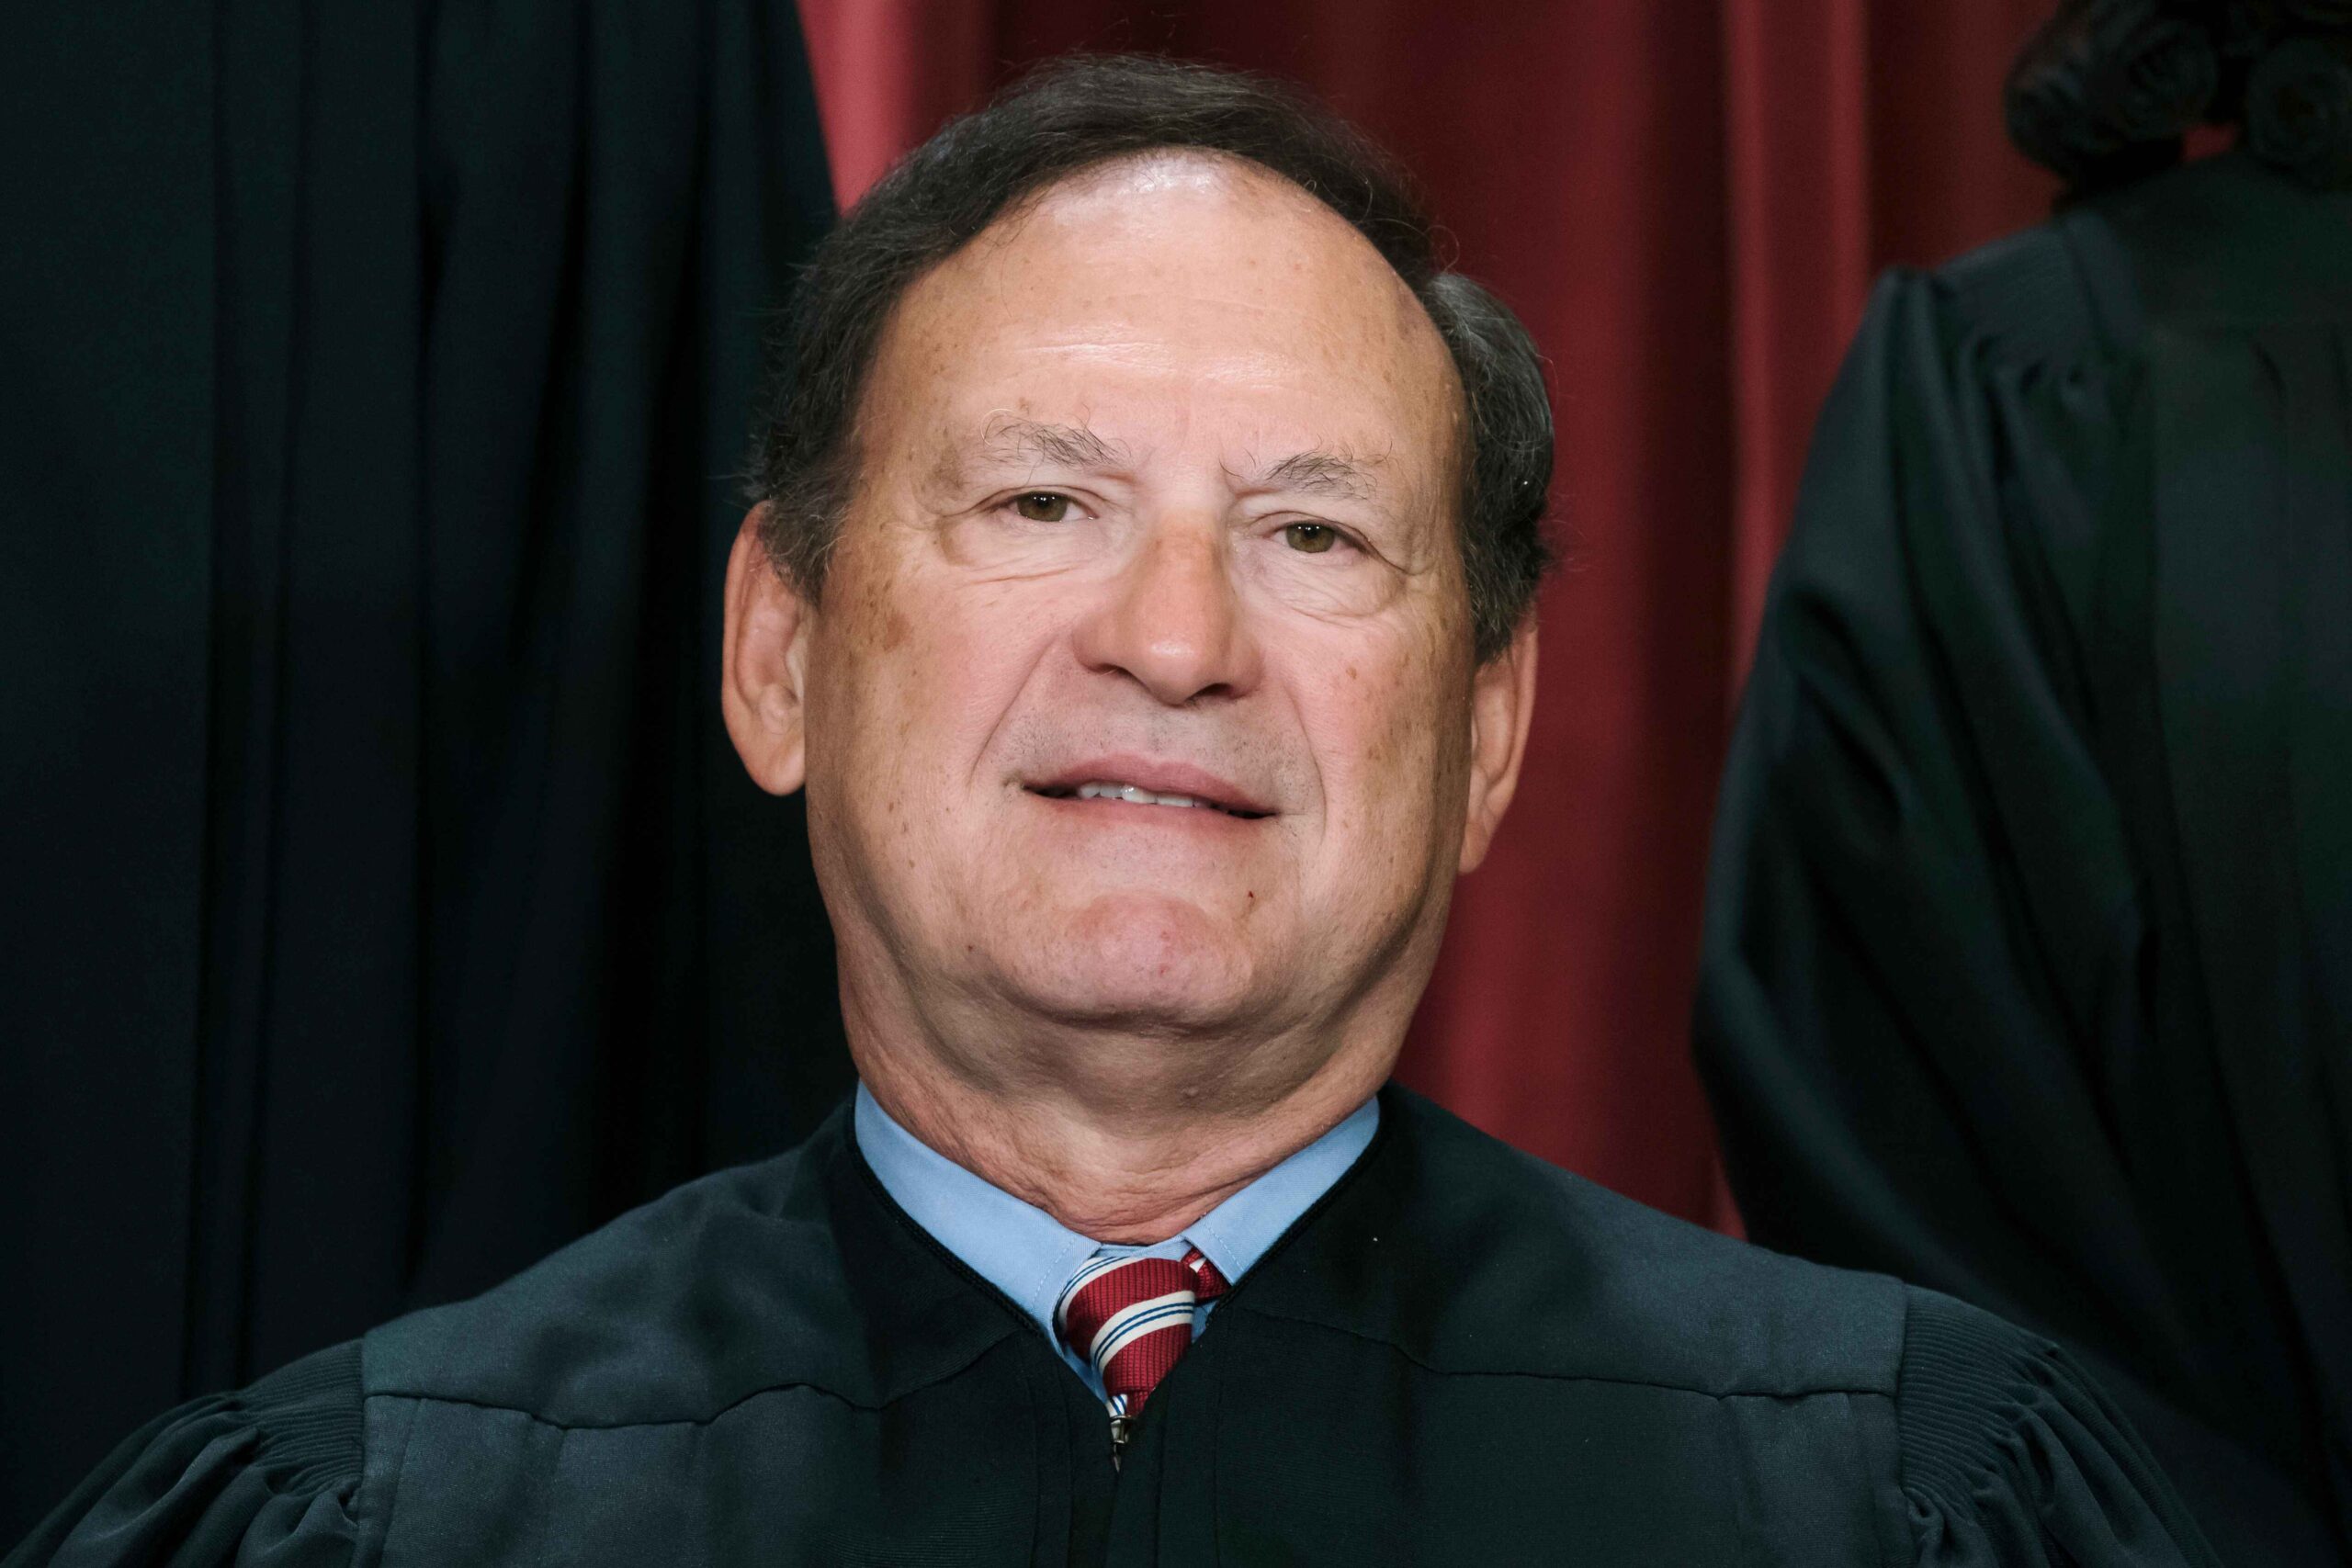 Cosmopolitan Magazine is promoting the Samuel Alito’s Mom’s Satanic Abortion Clinic, which offers satanic abortion rituals after the overturning of Roe v. Wade.